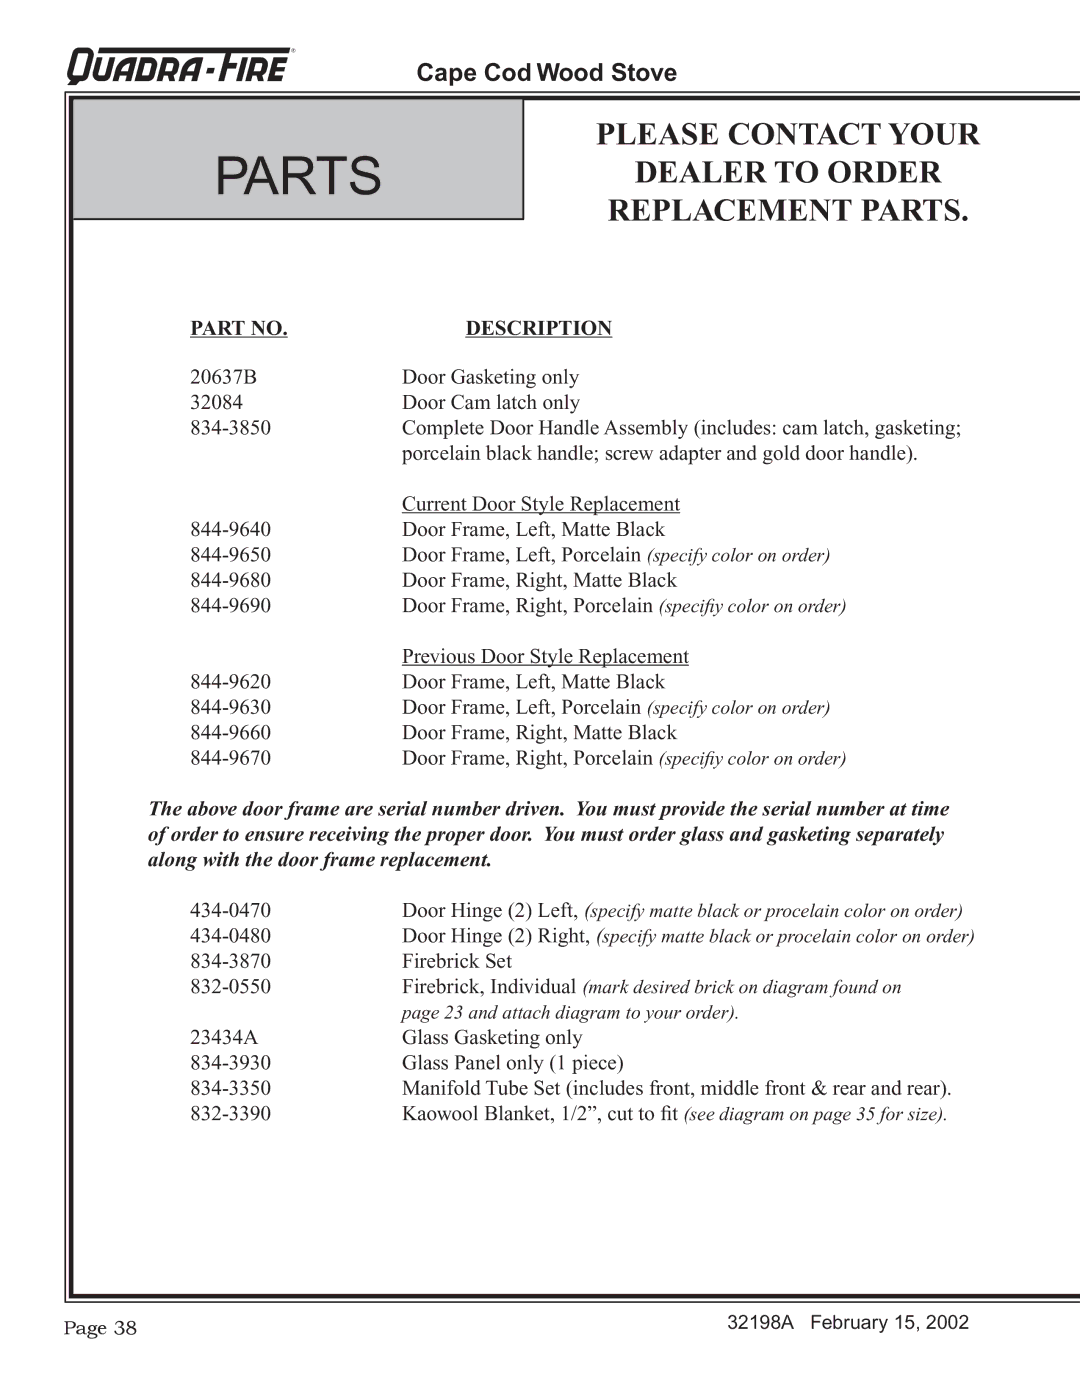 Quadra-Fire 32198A installation instructions Please Contact Your Dealer to Order Replacement Parts 